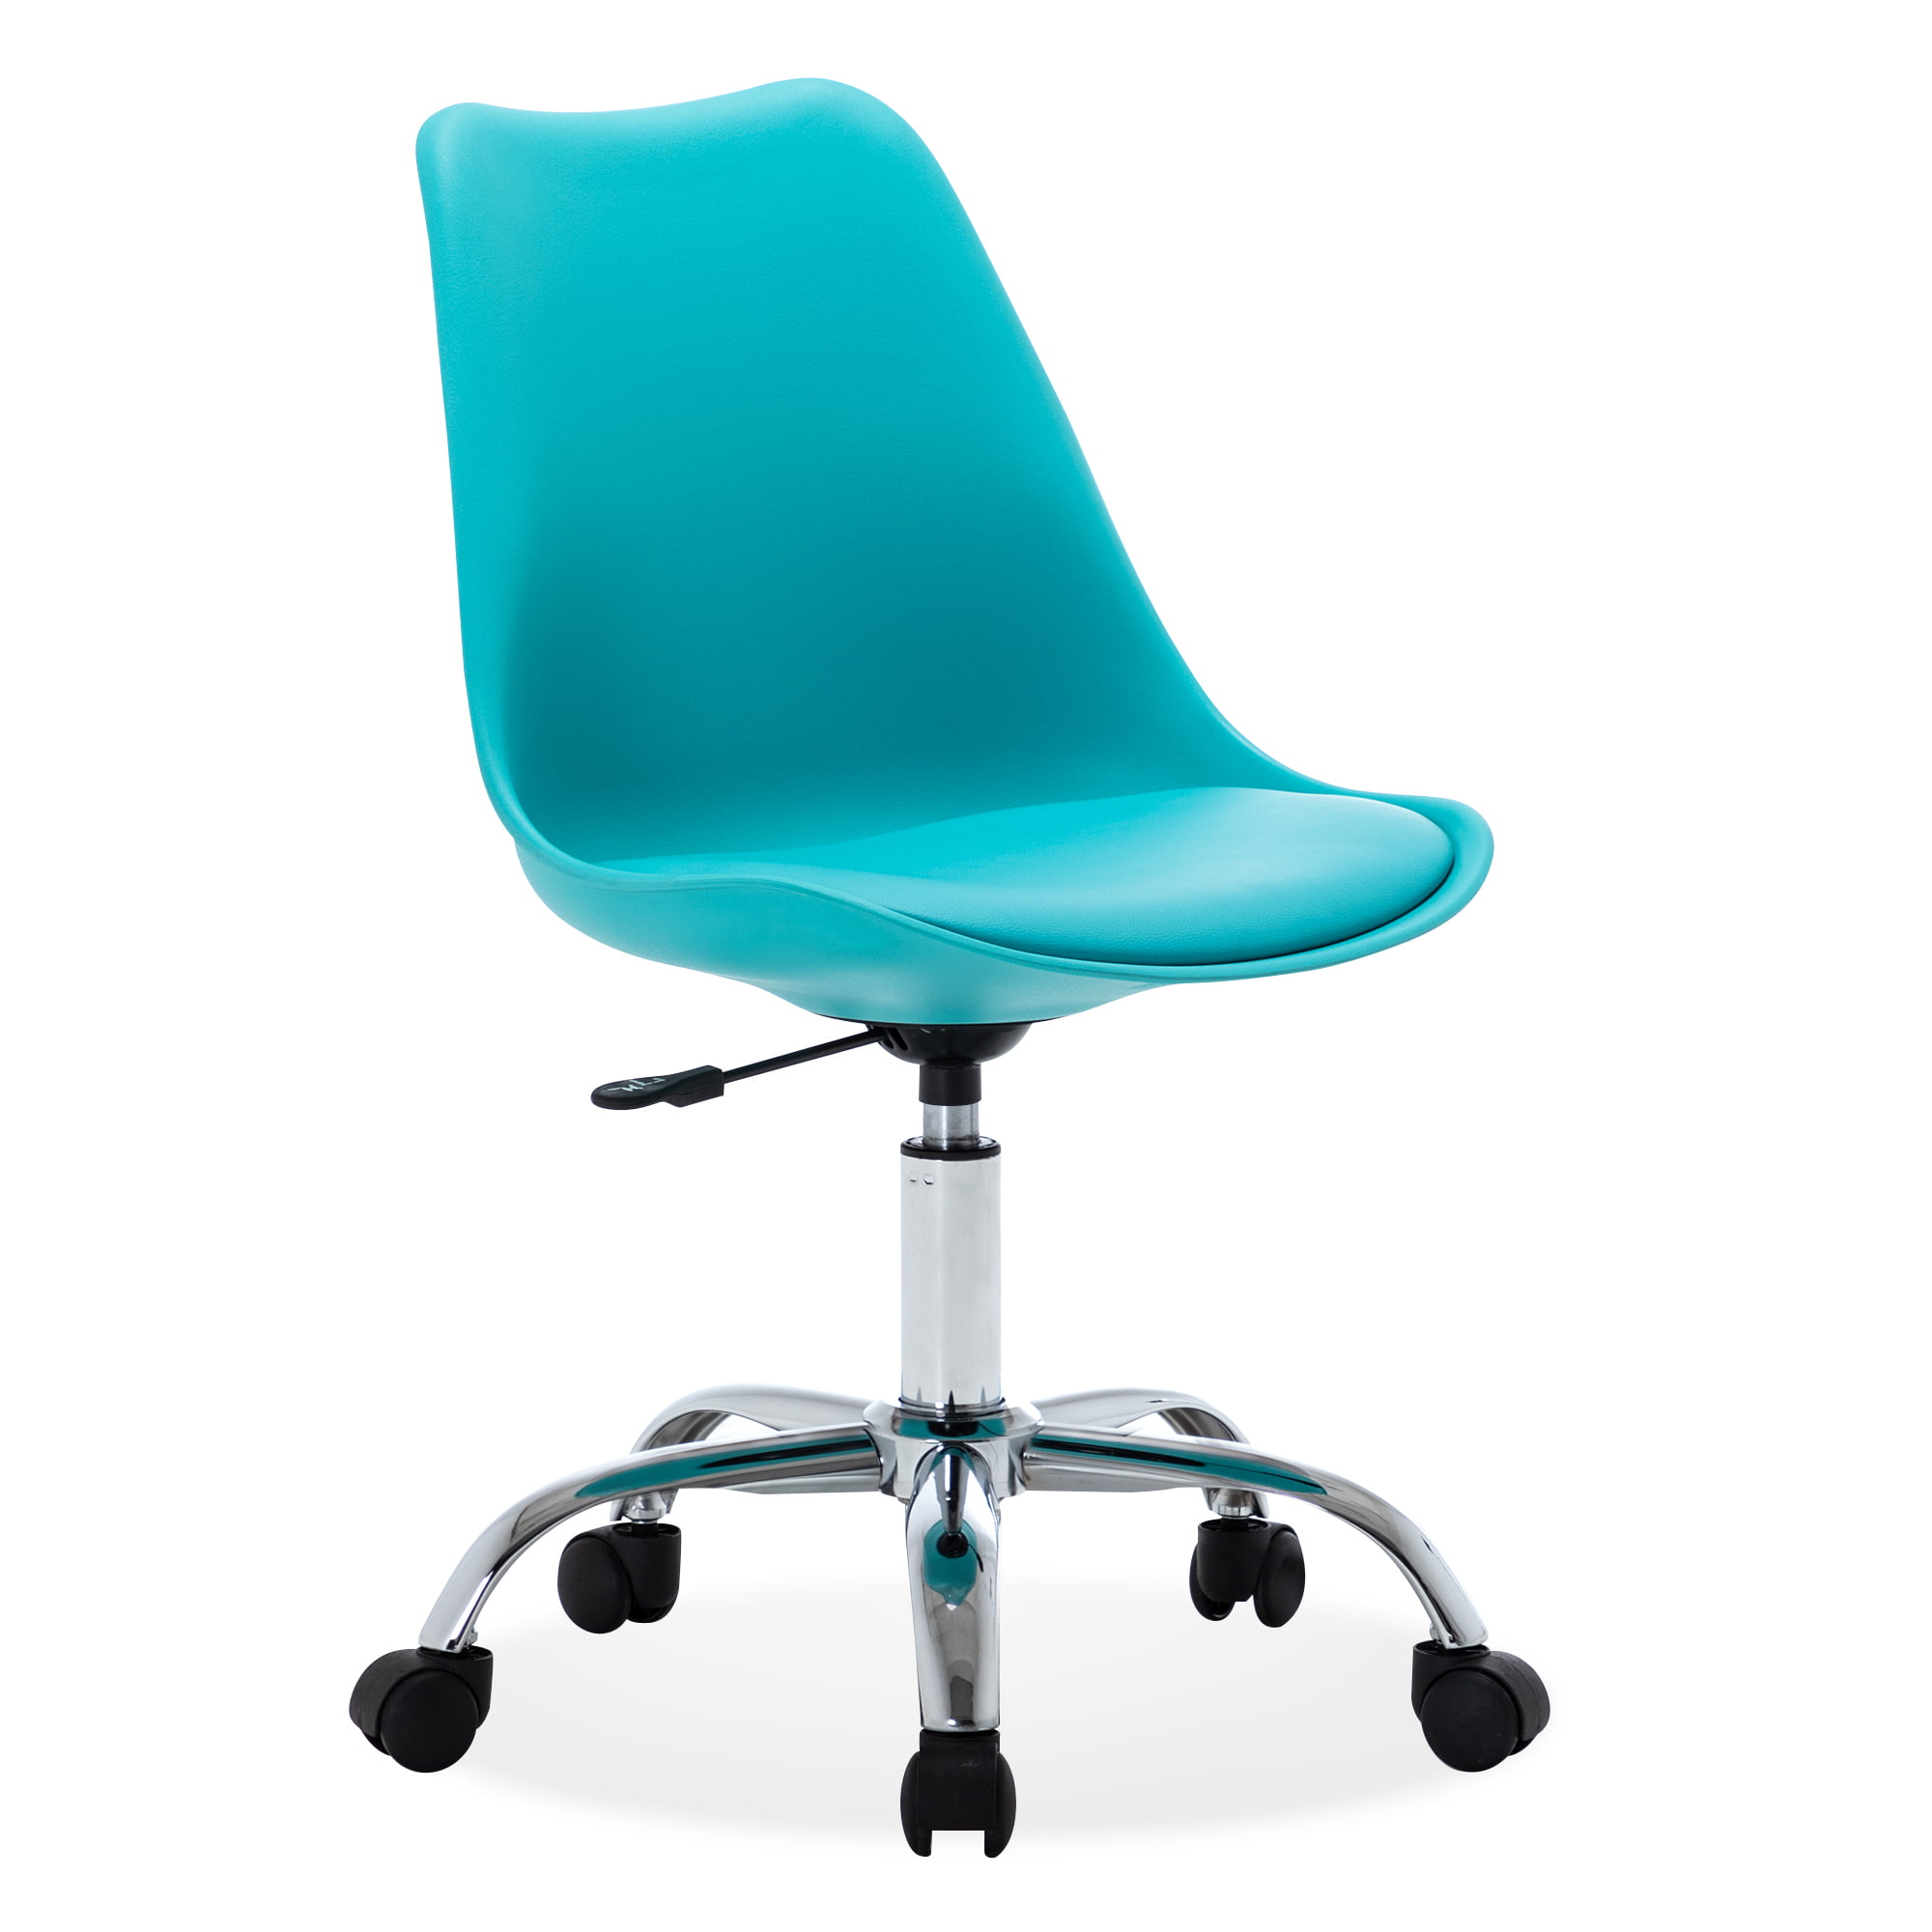 BELLEZE Armless Mid-Back Office Task Chair Faux Leather Upholstery Height Adjustable Swivel, Teal